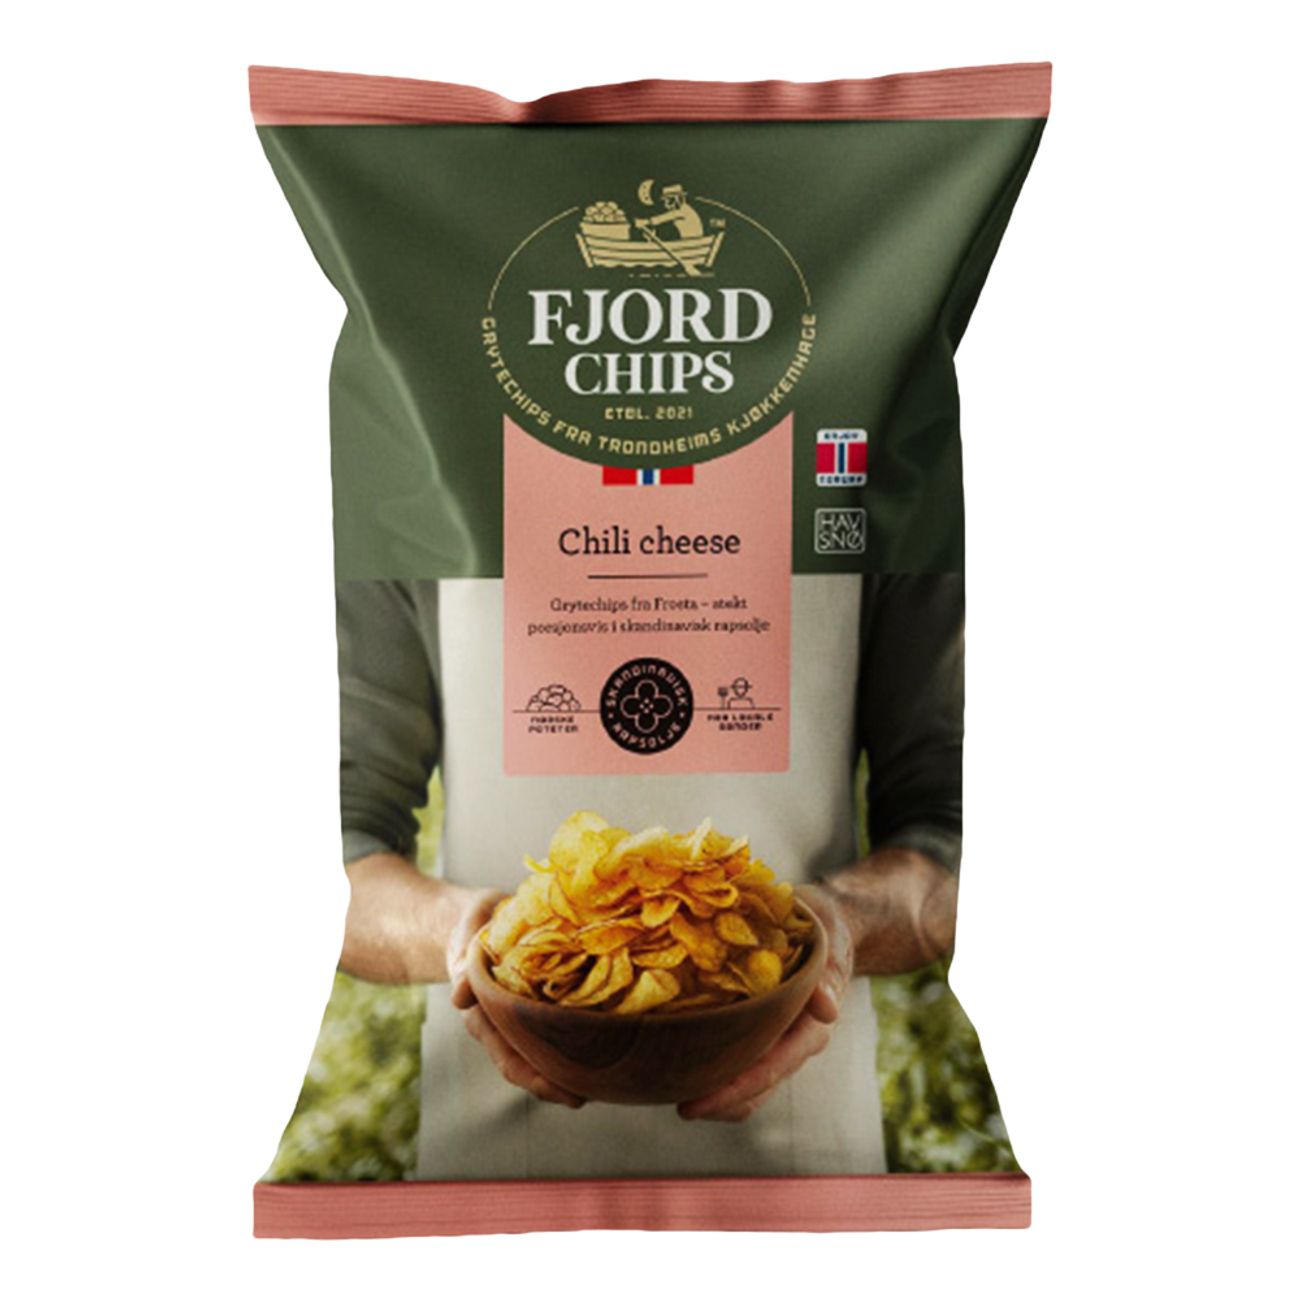 fjordchips-chili-cheese-101293-1